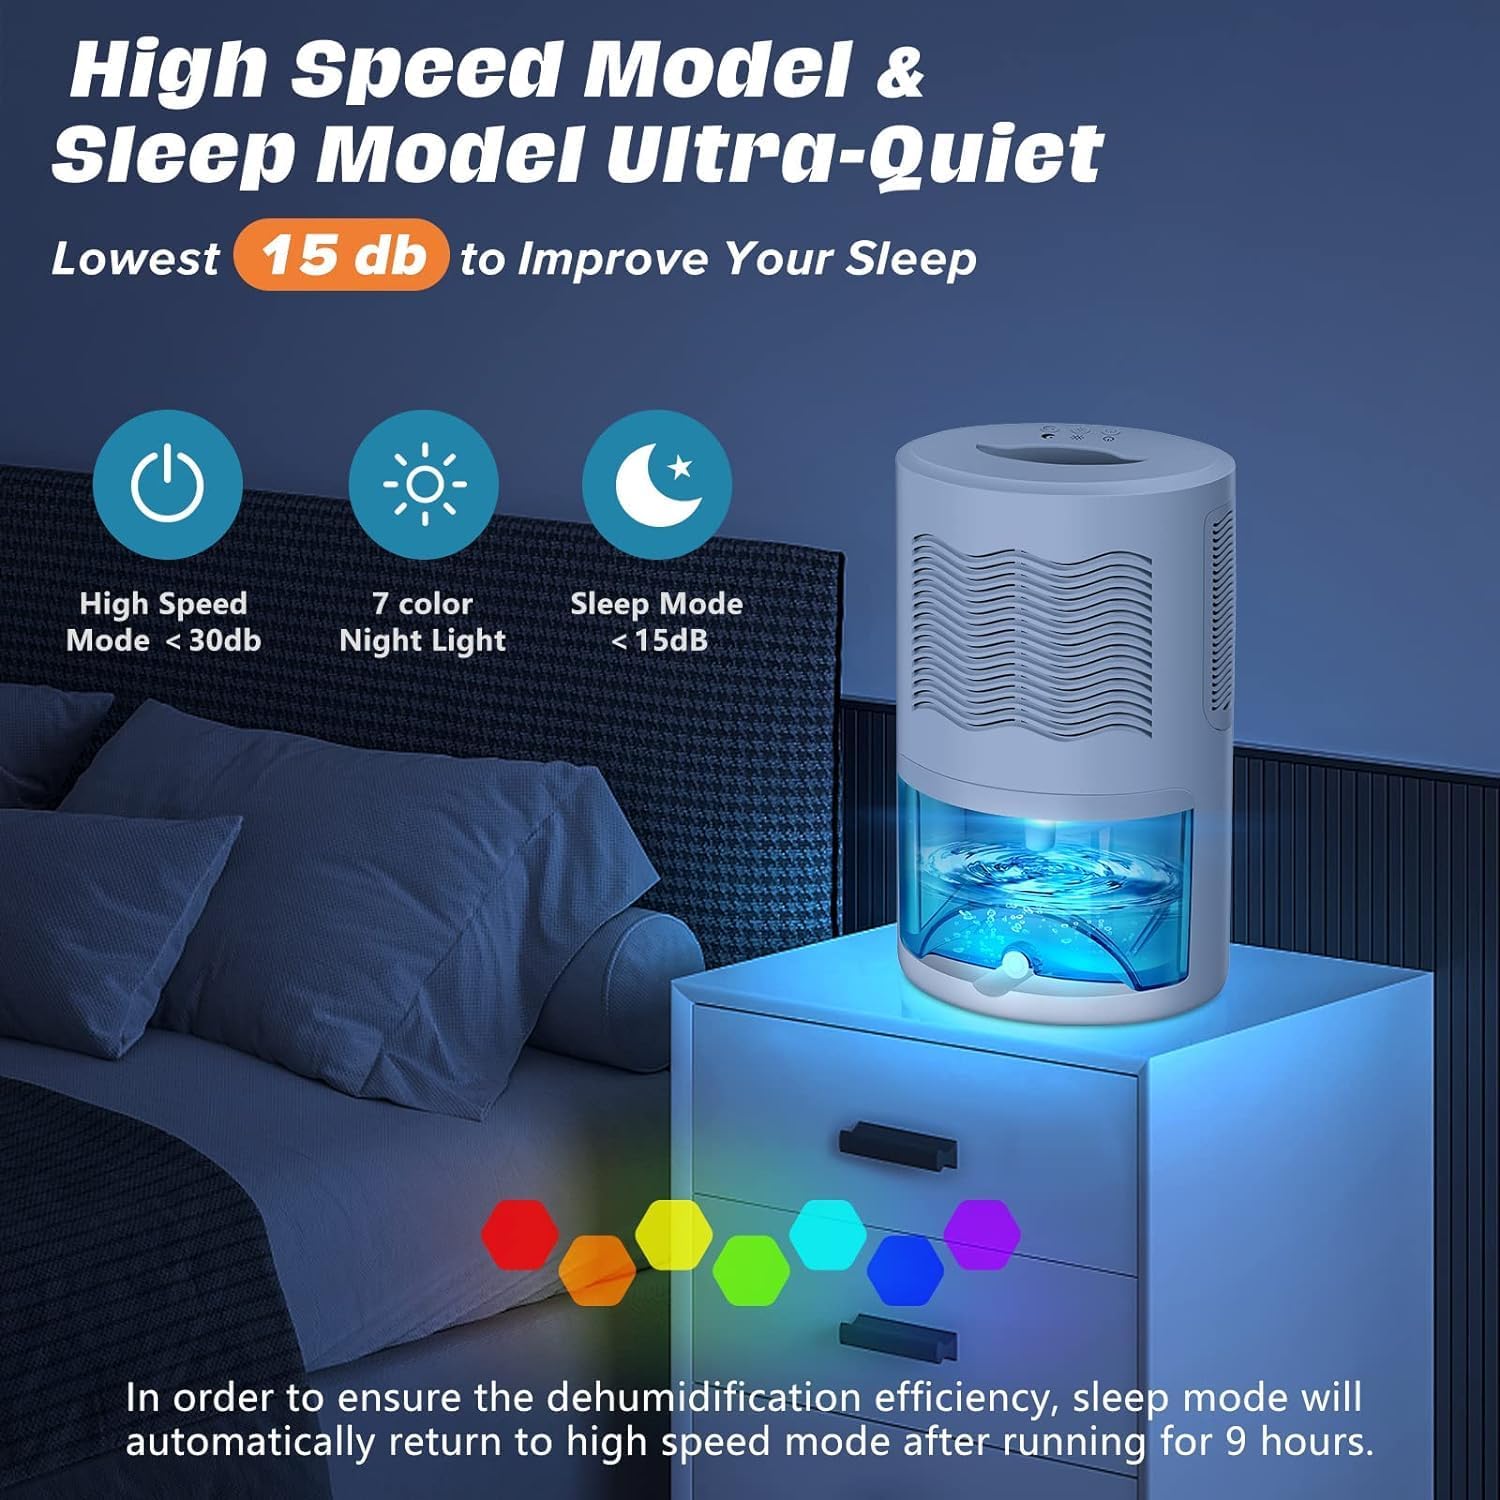 Gocheer Dehumidifiers for Home for Room,800 sq ft Dehumidifier with Drain Hose for Basement,68 OZ Small Dehumidifier for Bedroom Bathroom RV Closet with Auto Shut Off,7 Colors LED Light,Sleep Model